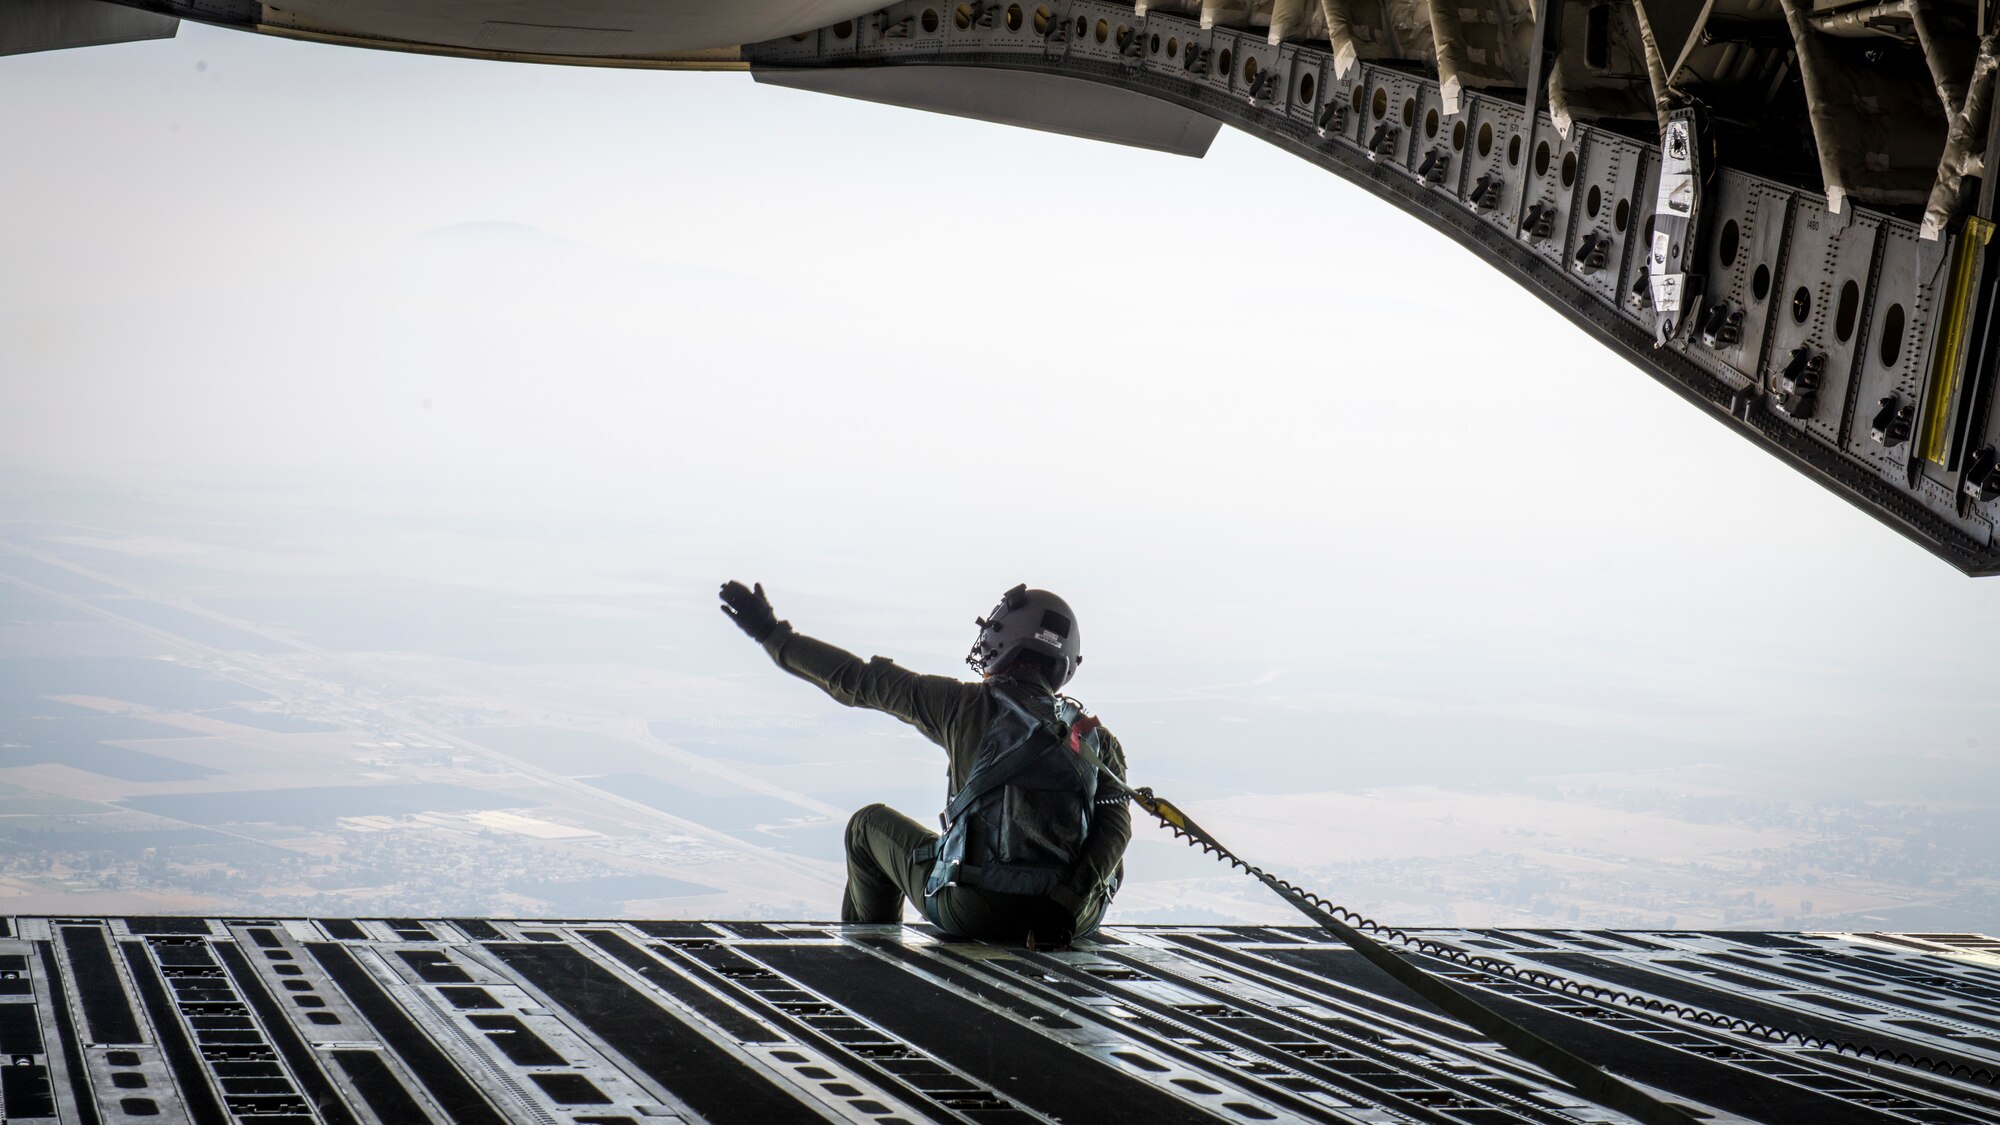 Staff Sgt. Kori Myers, 418th Flight Test Squadron C-17 load master, waves from the back of a C-17 Globemaster III during the 2020 Aerospace Valley Air Show at Edwards Air Force Base, Oct. 9. (Air Force photo by Giancarlo Casem)